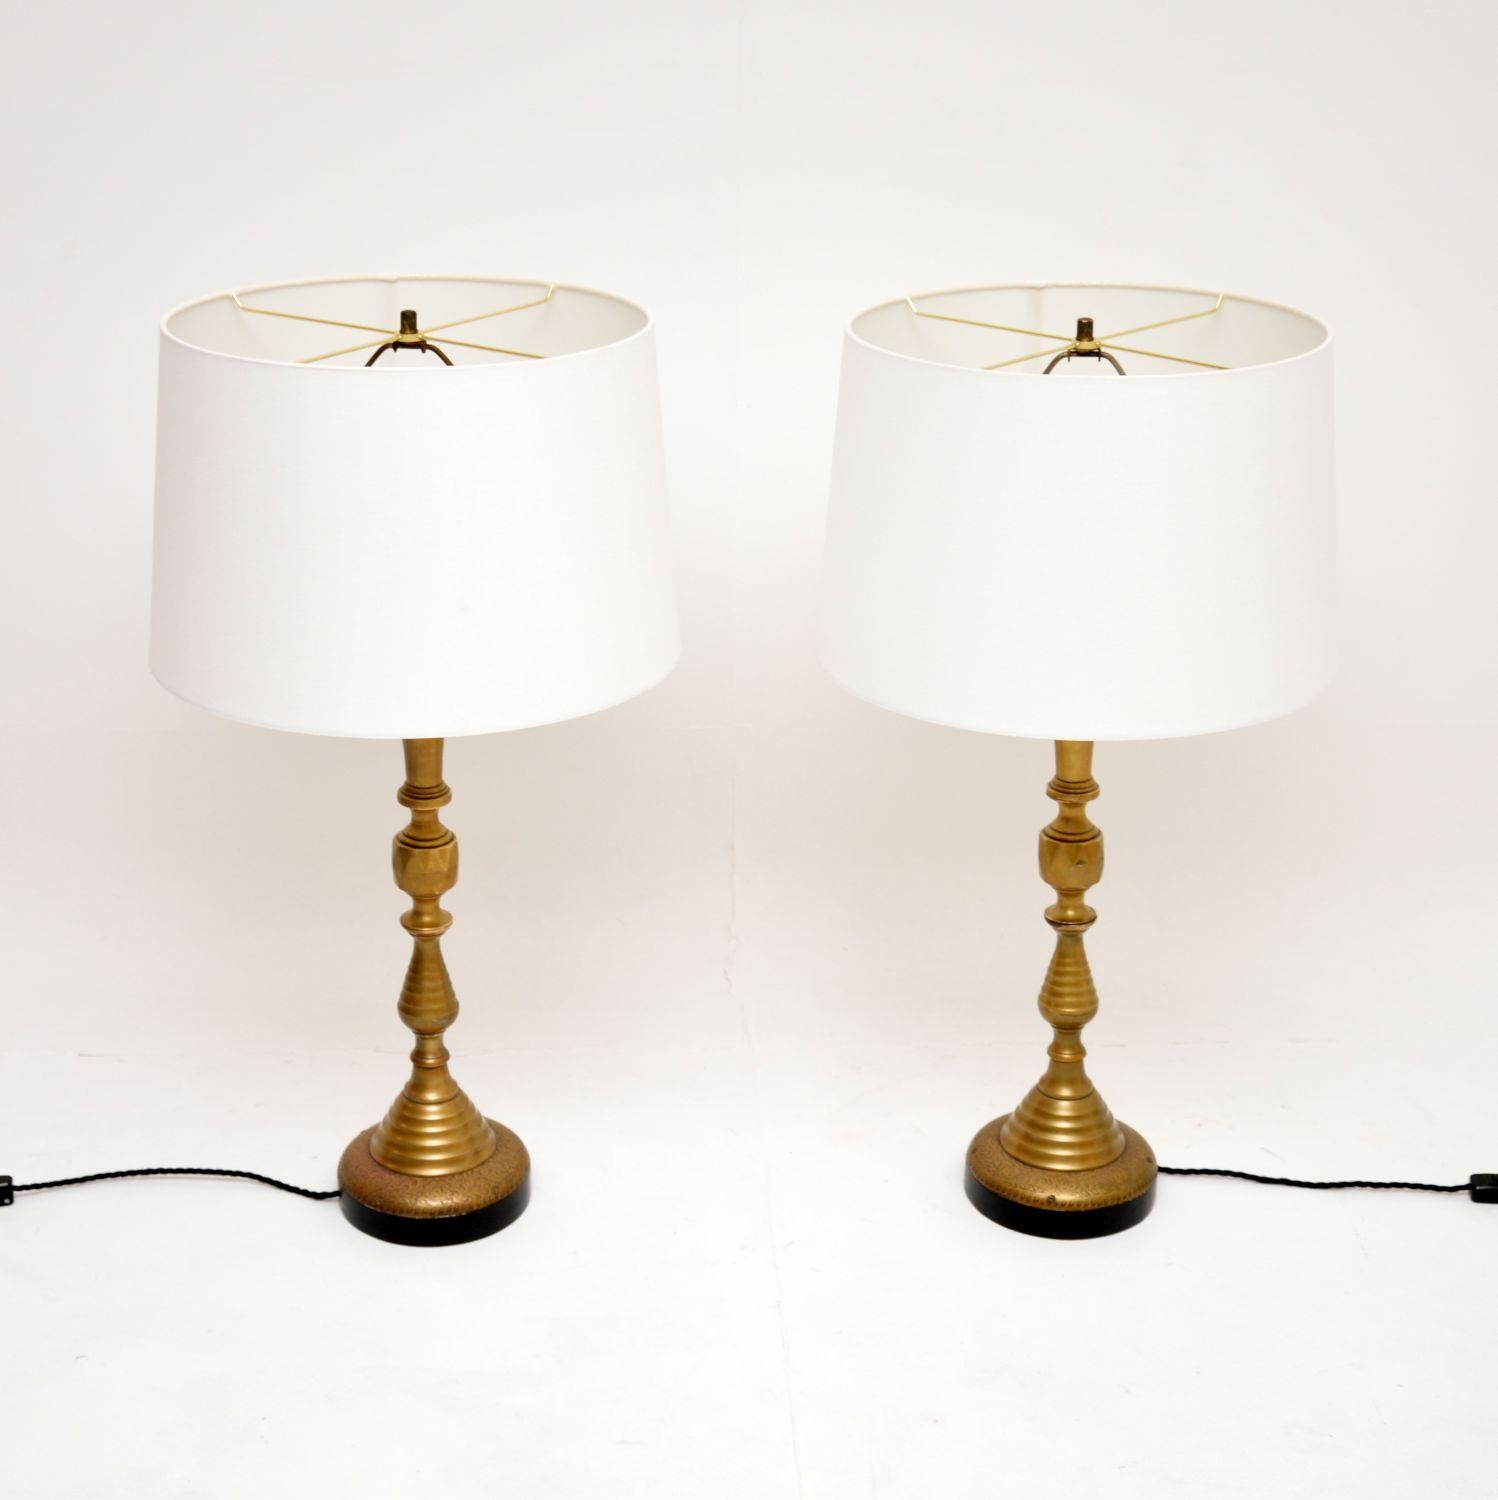 A very impressive large pair of antique brass table lamps, dating from around the 1950’s.

They are of superb quality, with beautiful Victorian style turned columns and lovely intricate patterns to the base.

The condition is excellent for their